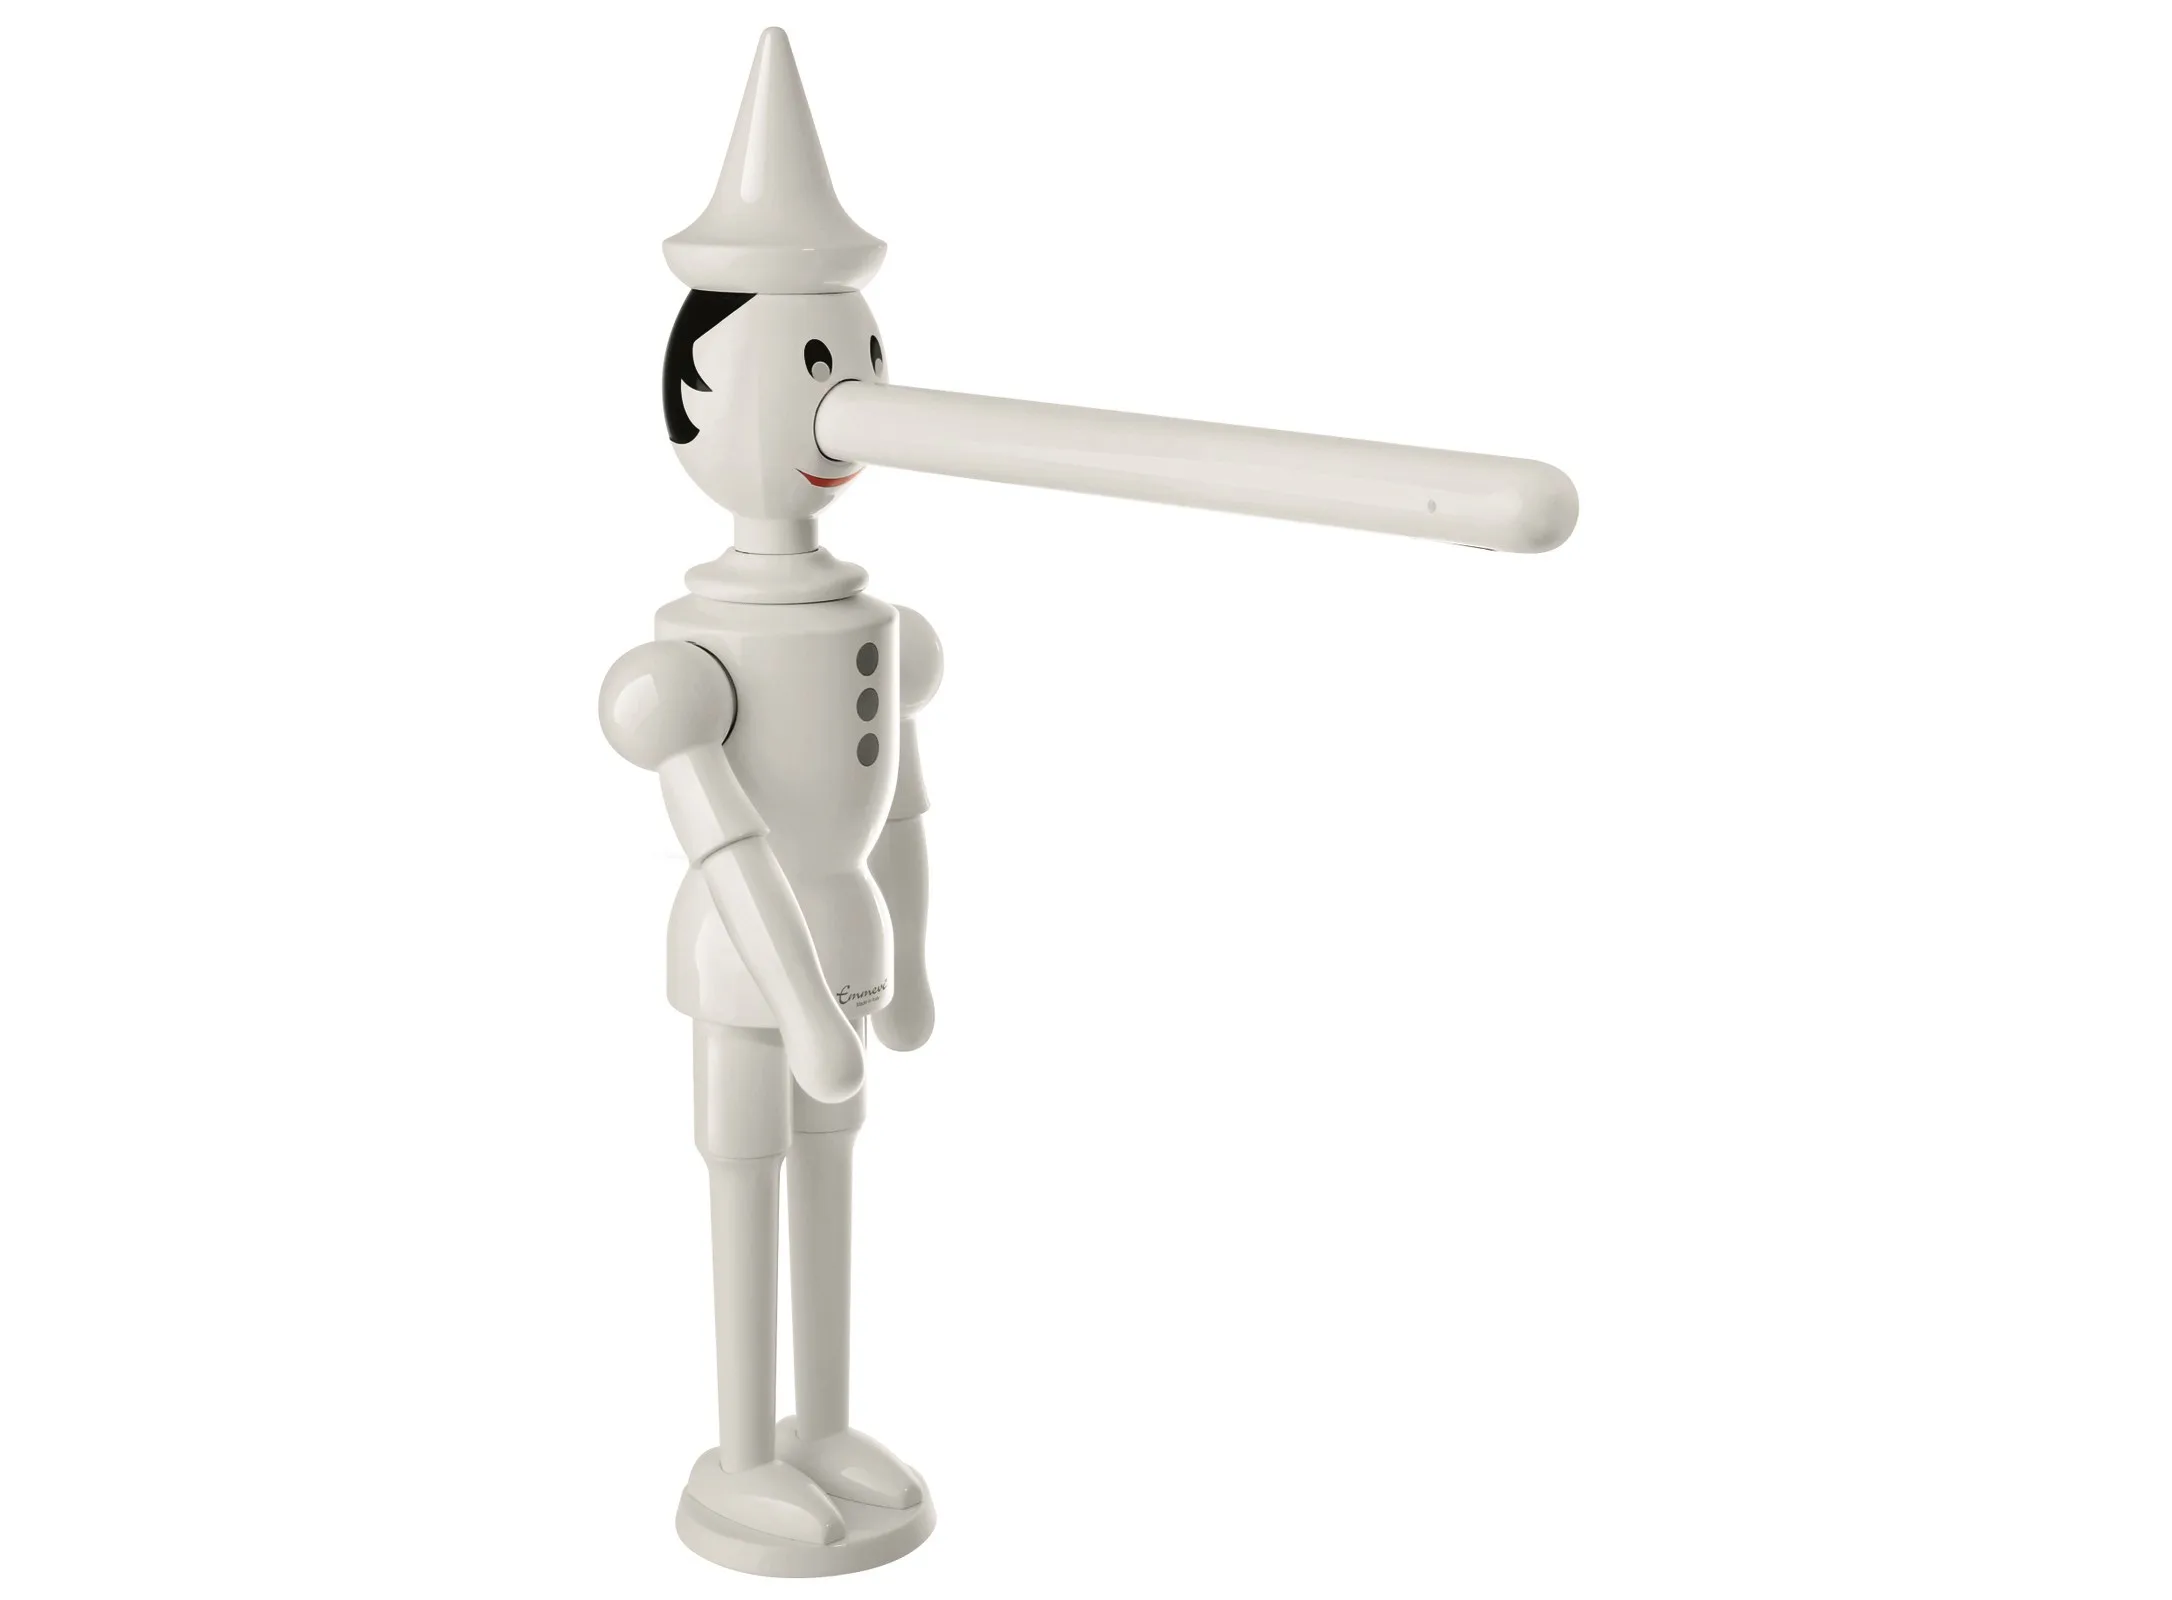 Pinocchio Faucet by Bruno Negri